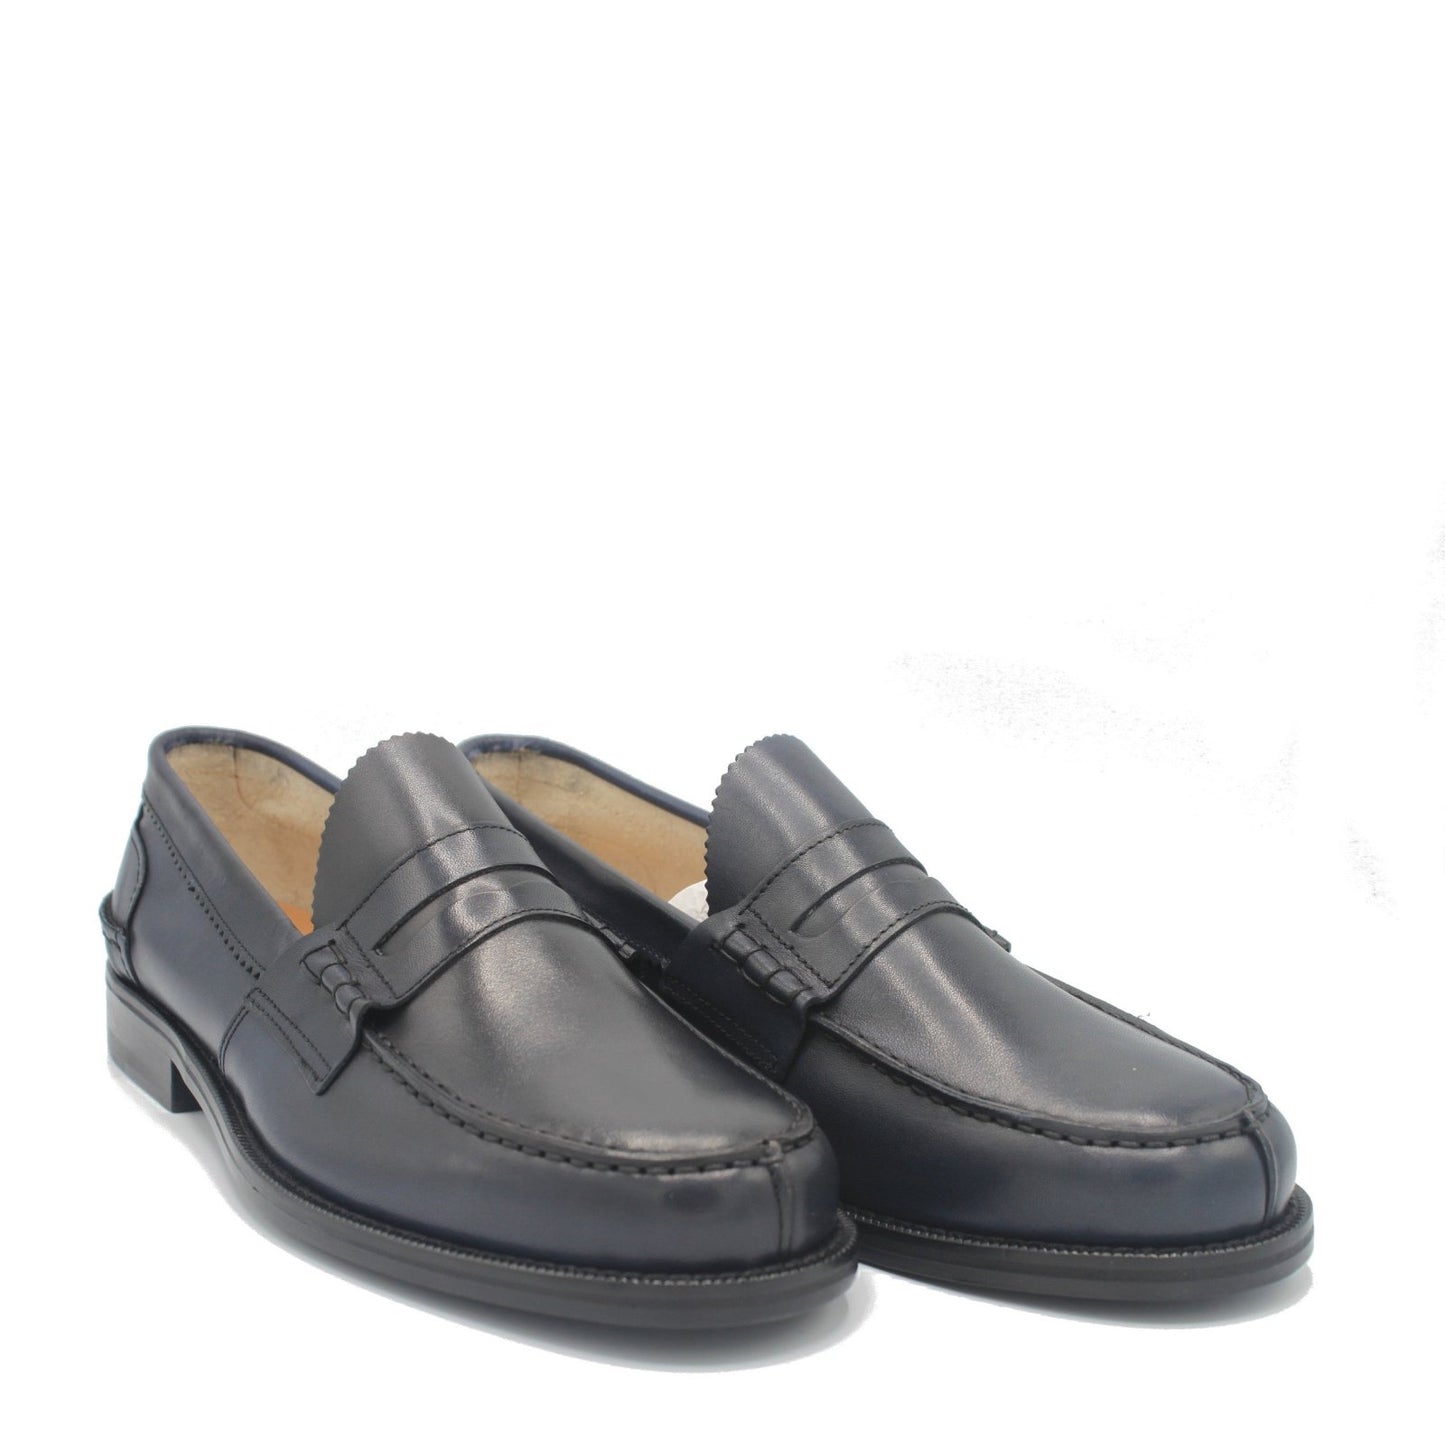 PENNY LOAFER BLUE LEATHER - Saxone of Scotland